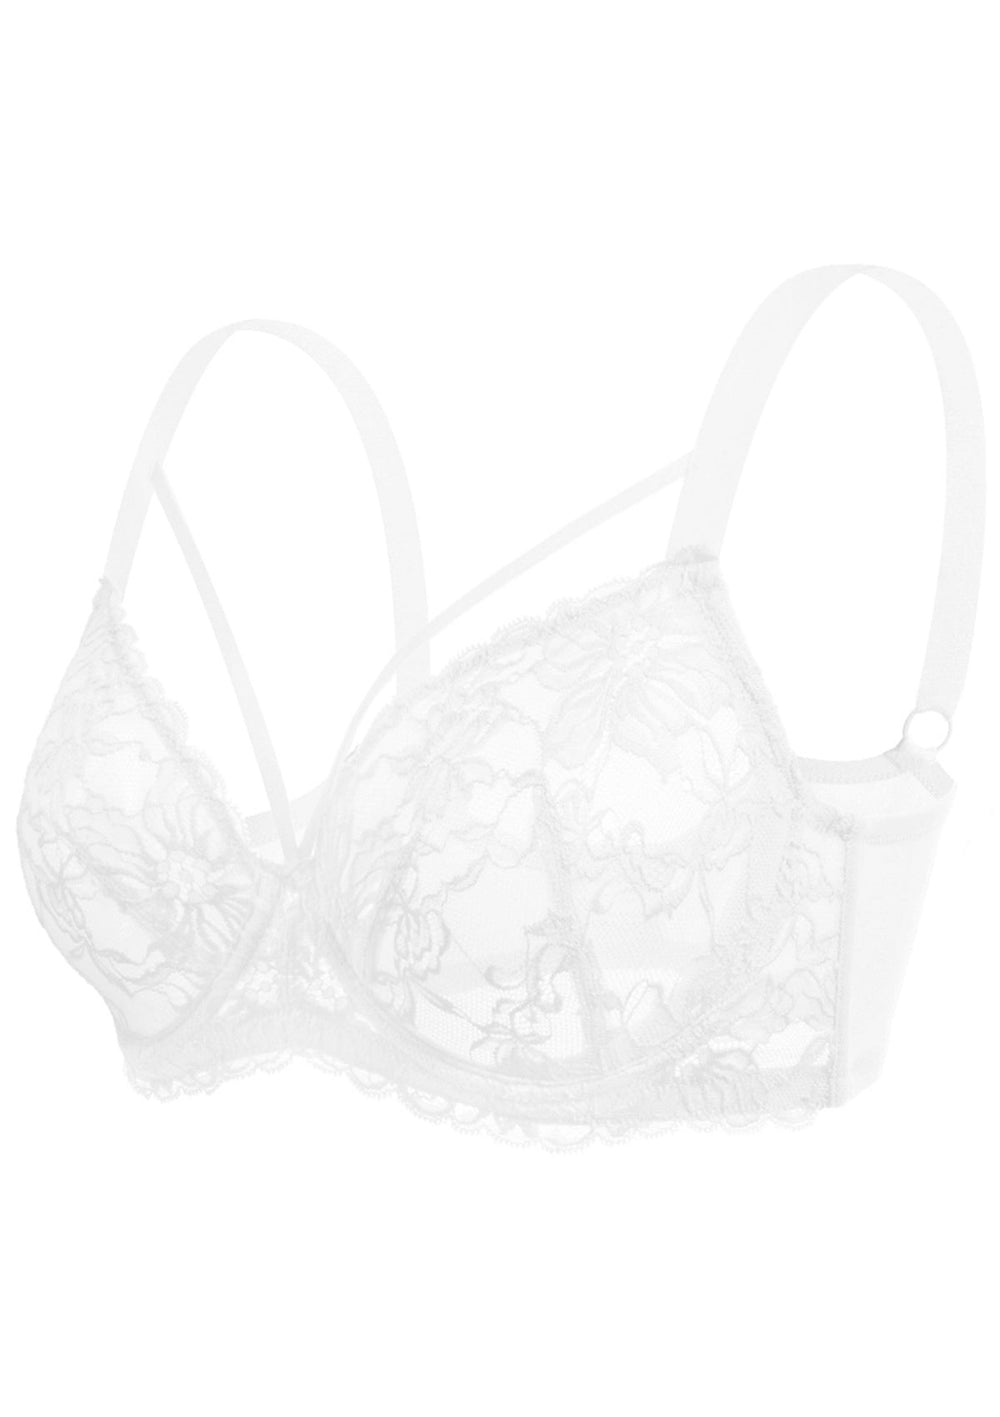 HSIA Pretty In Petals Matching Lace Bra and Panty Set Comfort Bra